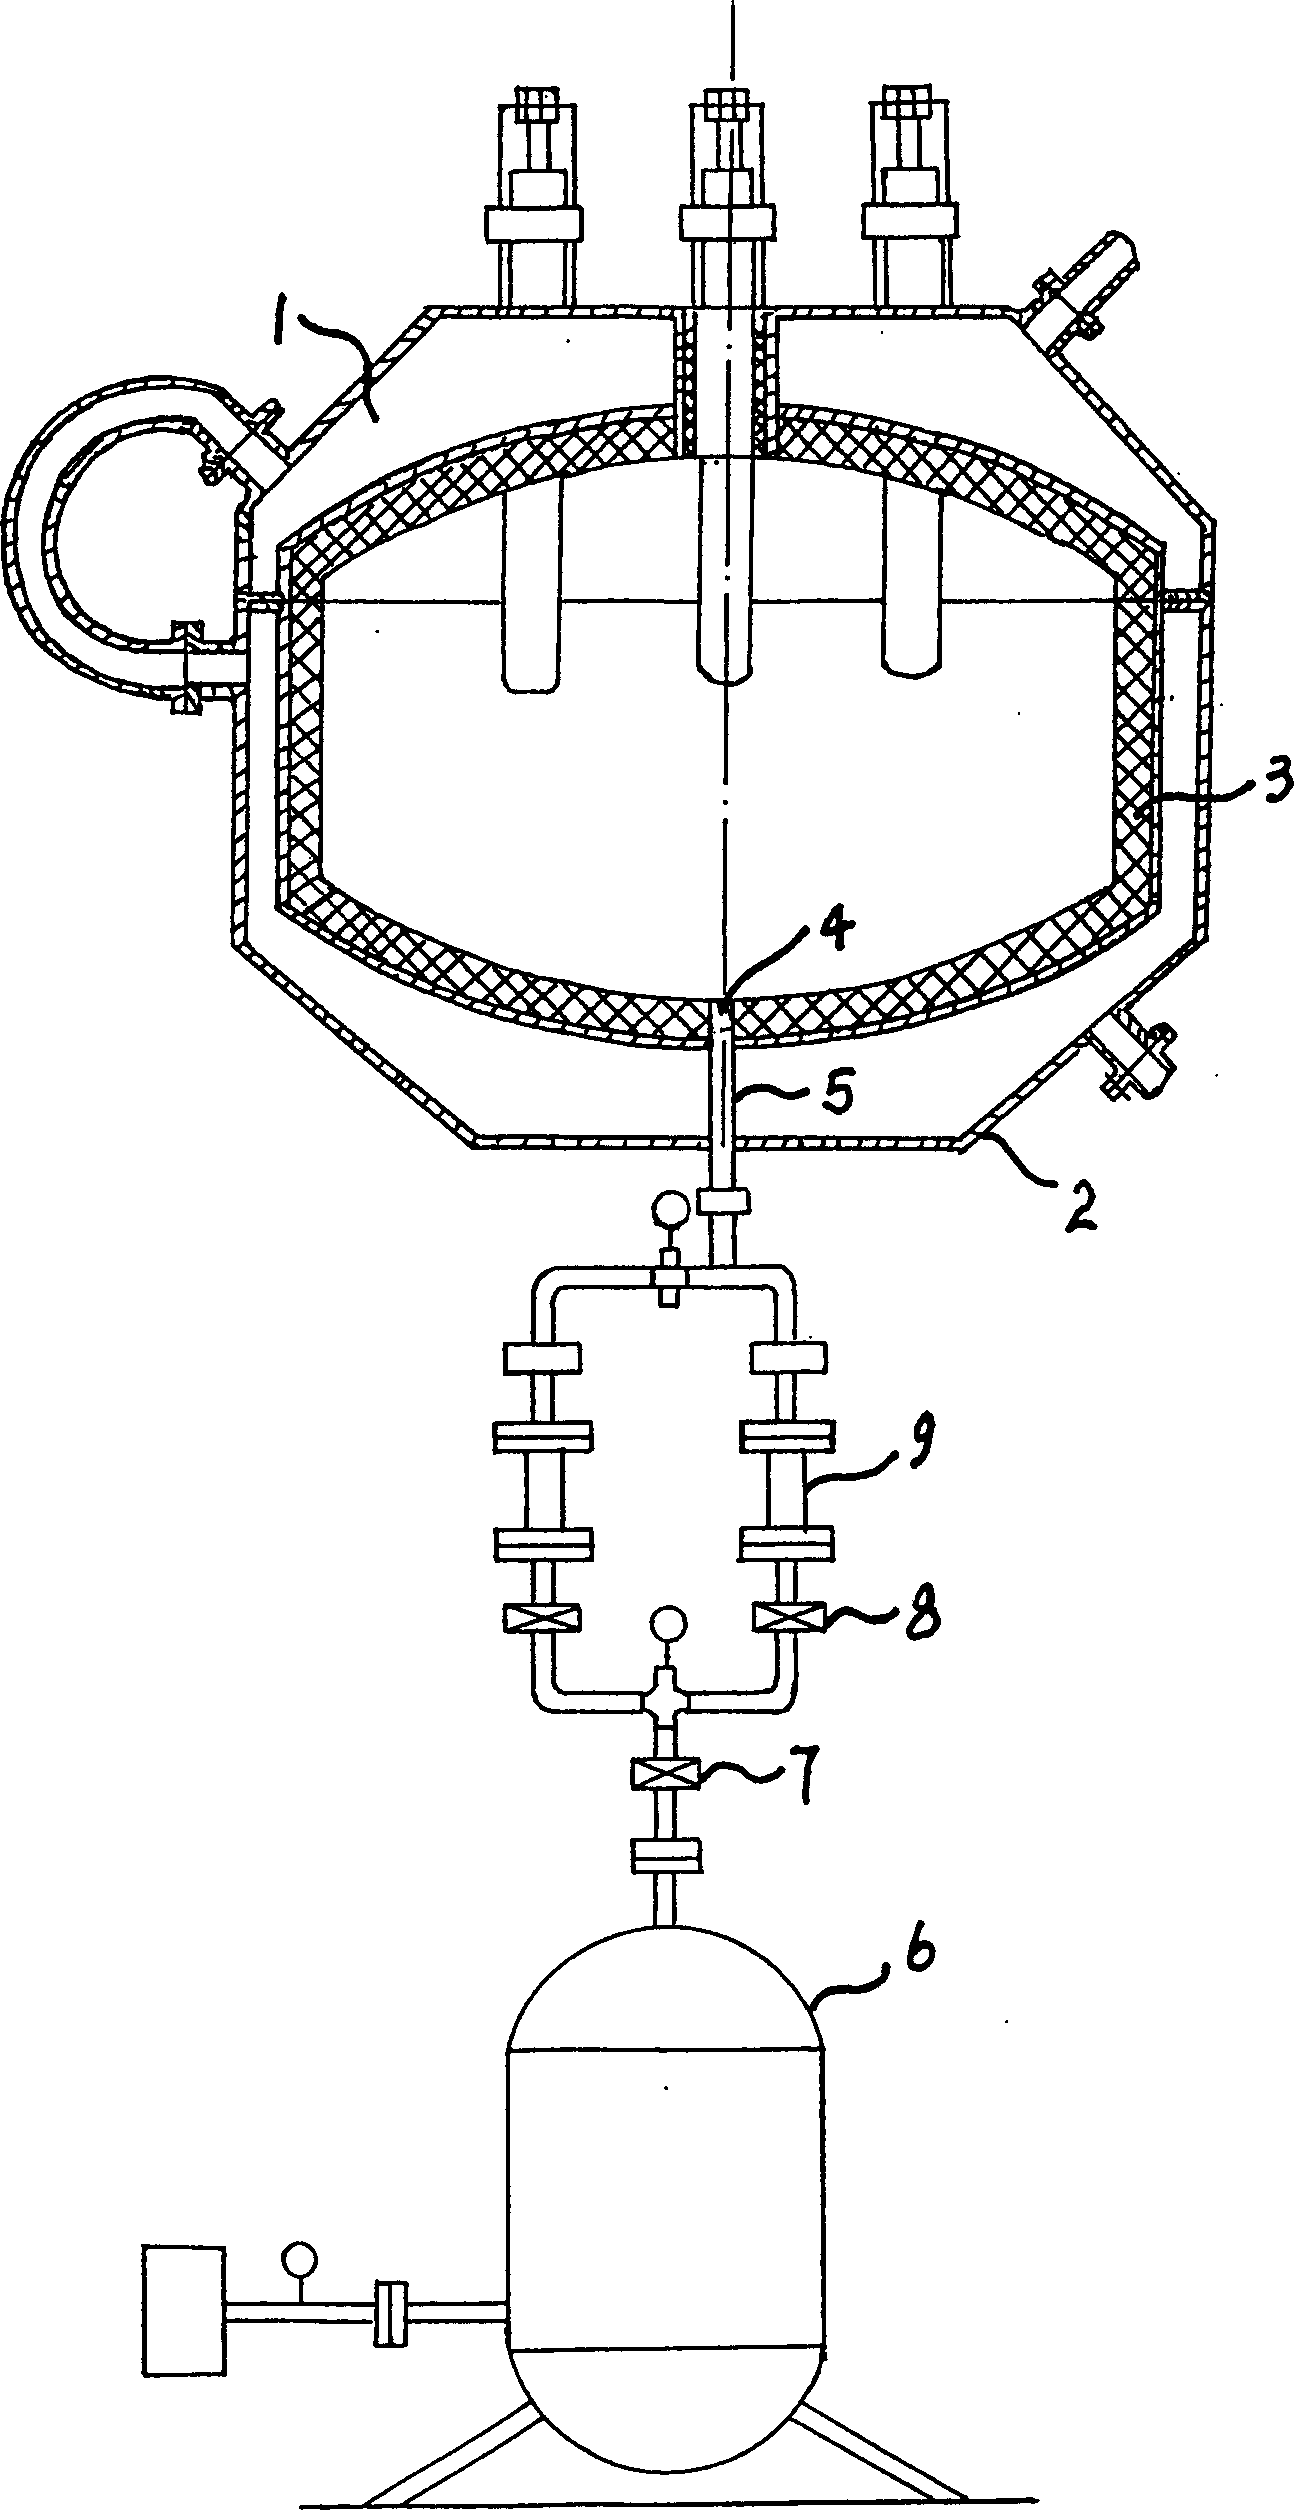 Technique of maufacturing electrocast refractories through bubbling method